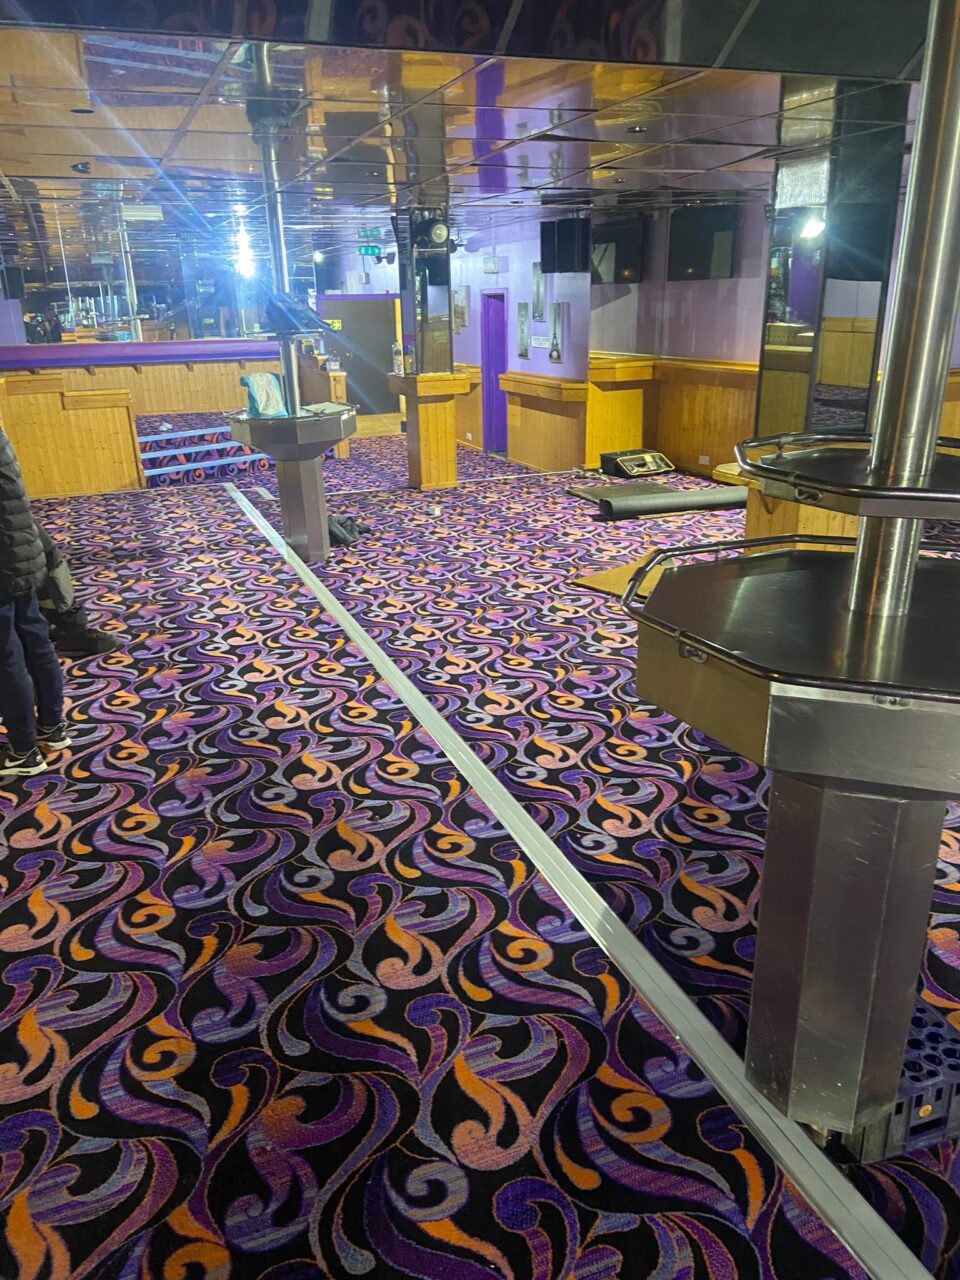 Acapulco Nightclub Halifax bar with bespoke purple and black patterned carpets designed by Wilton Carpets